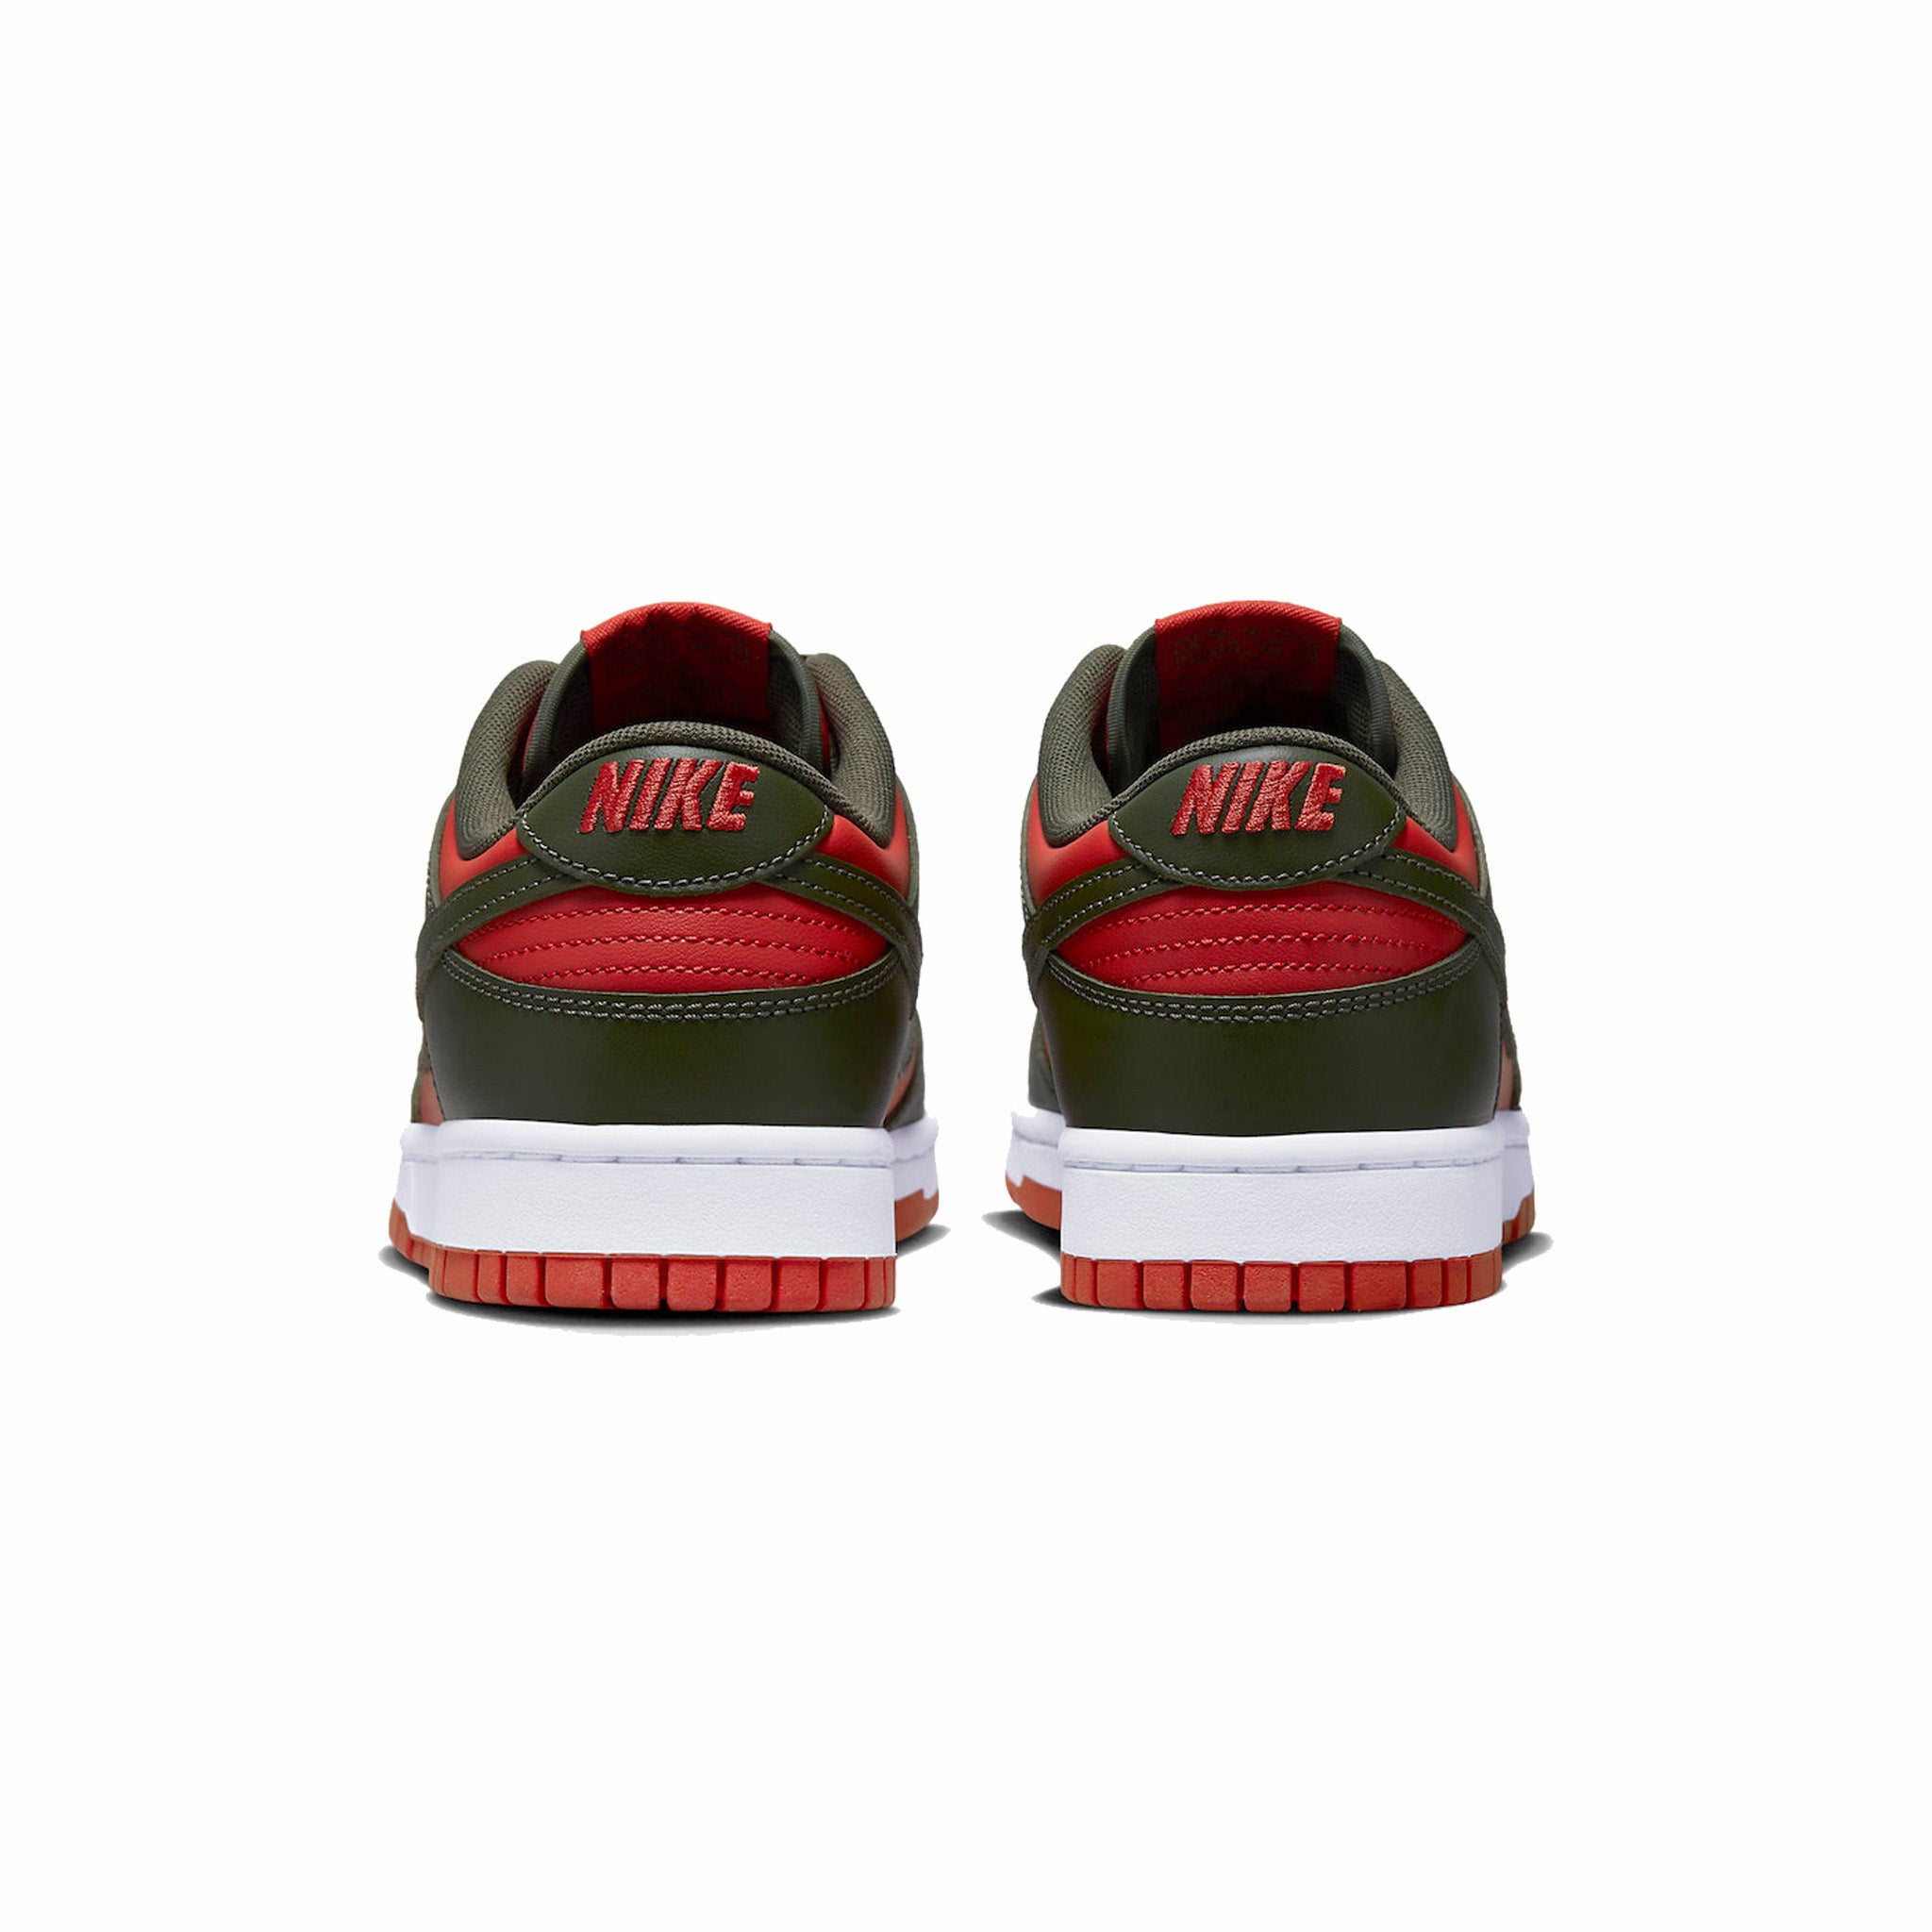 Nike Dunk Low Retro BTTYS “Mystic Red” (Mystic Red/Cargo Khaki-White) - August Shop